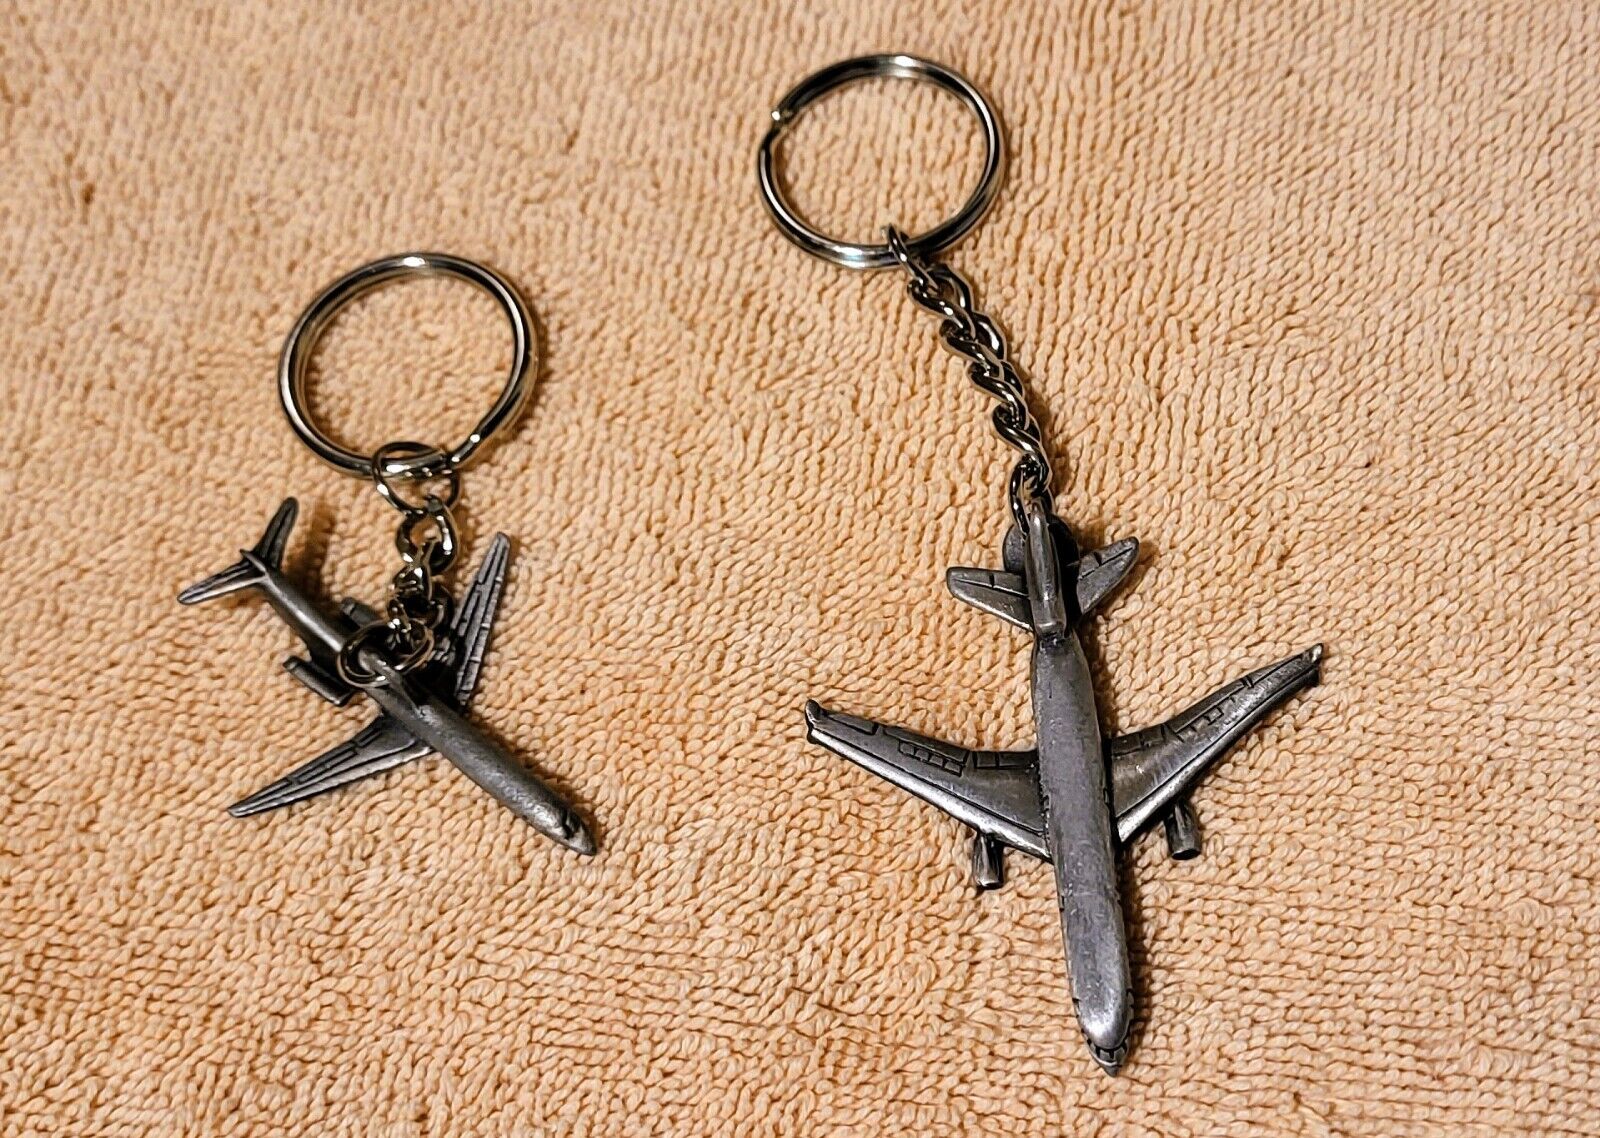 McDONNELL DOUGLAS PEWTER AIRCRAFT KEY CHAINS – MD-11 & MD-80 – Lot